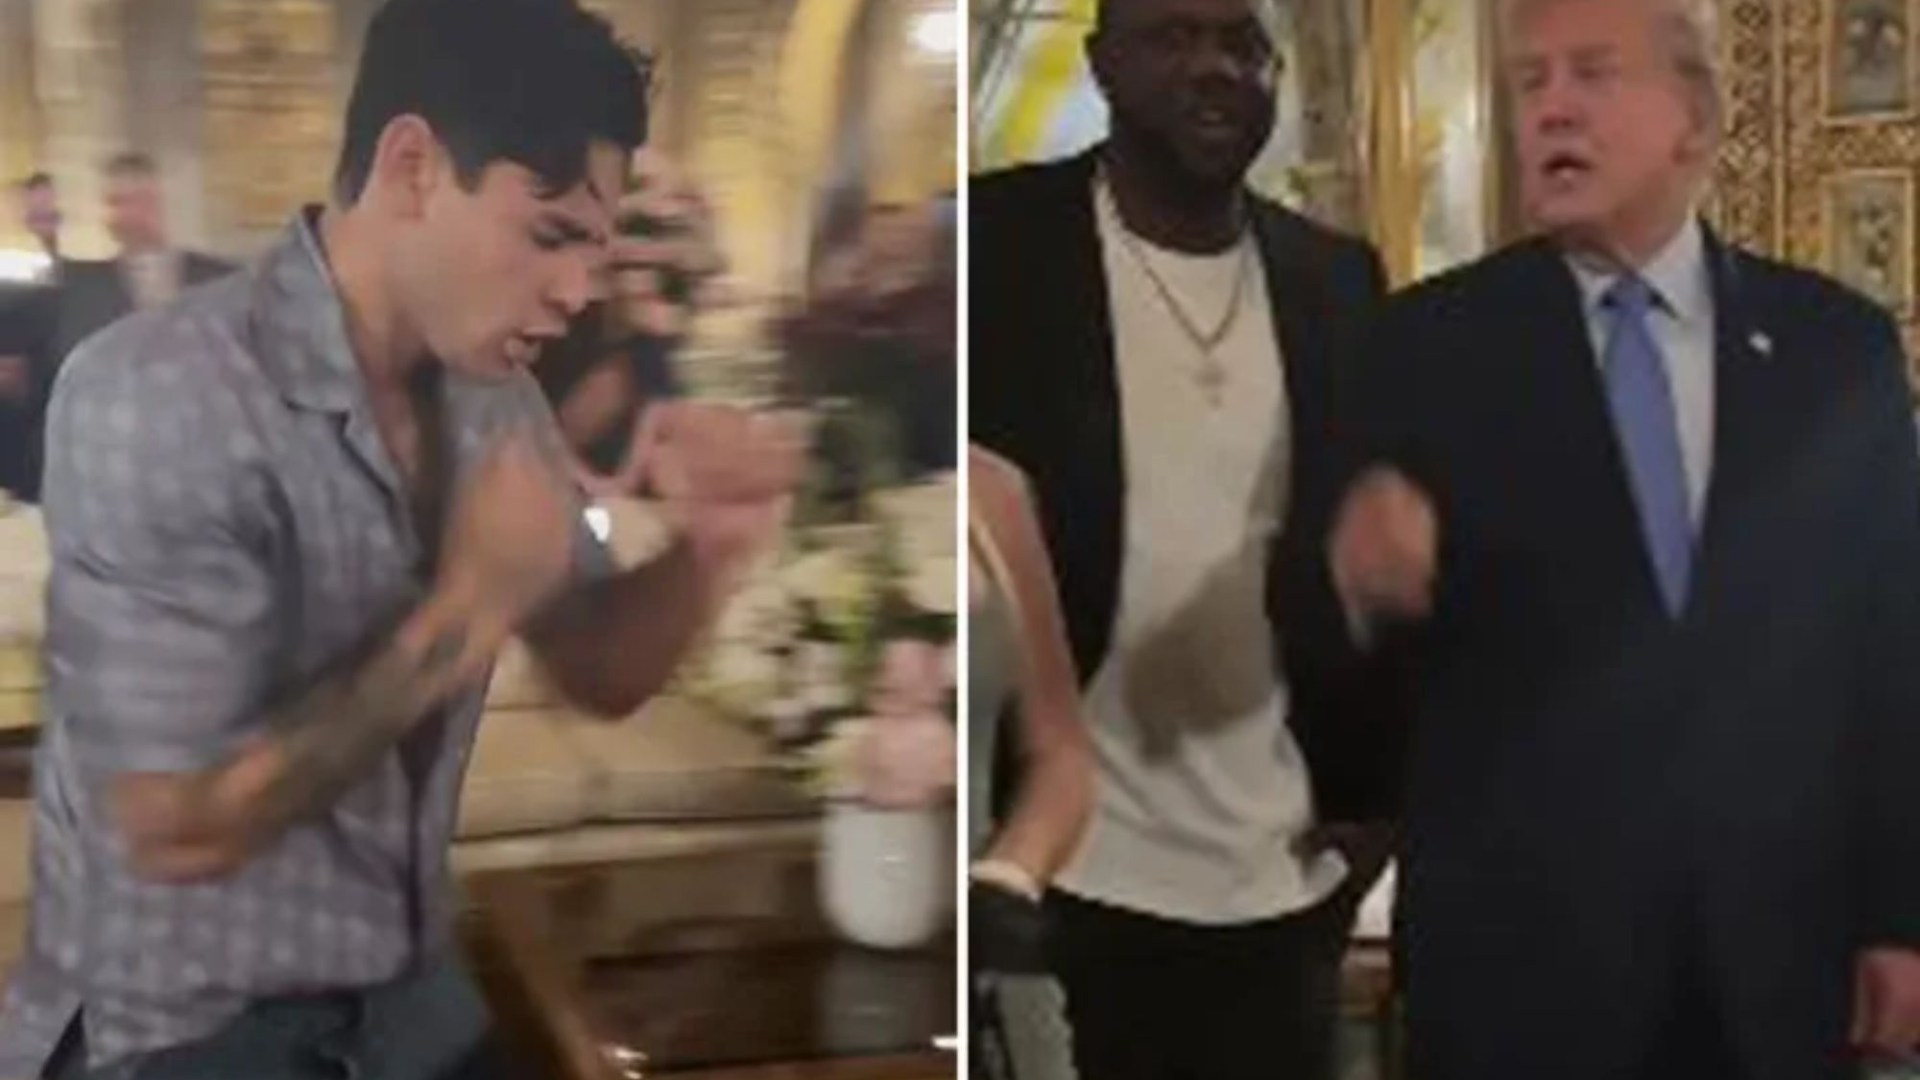 Ryan Garcia shadow boxes in front of Donald Trump in bizarre meeting before revealing who he wants to win US election [Video]